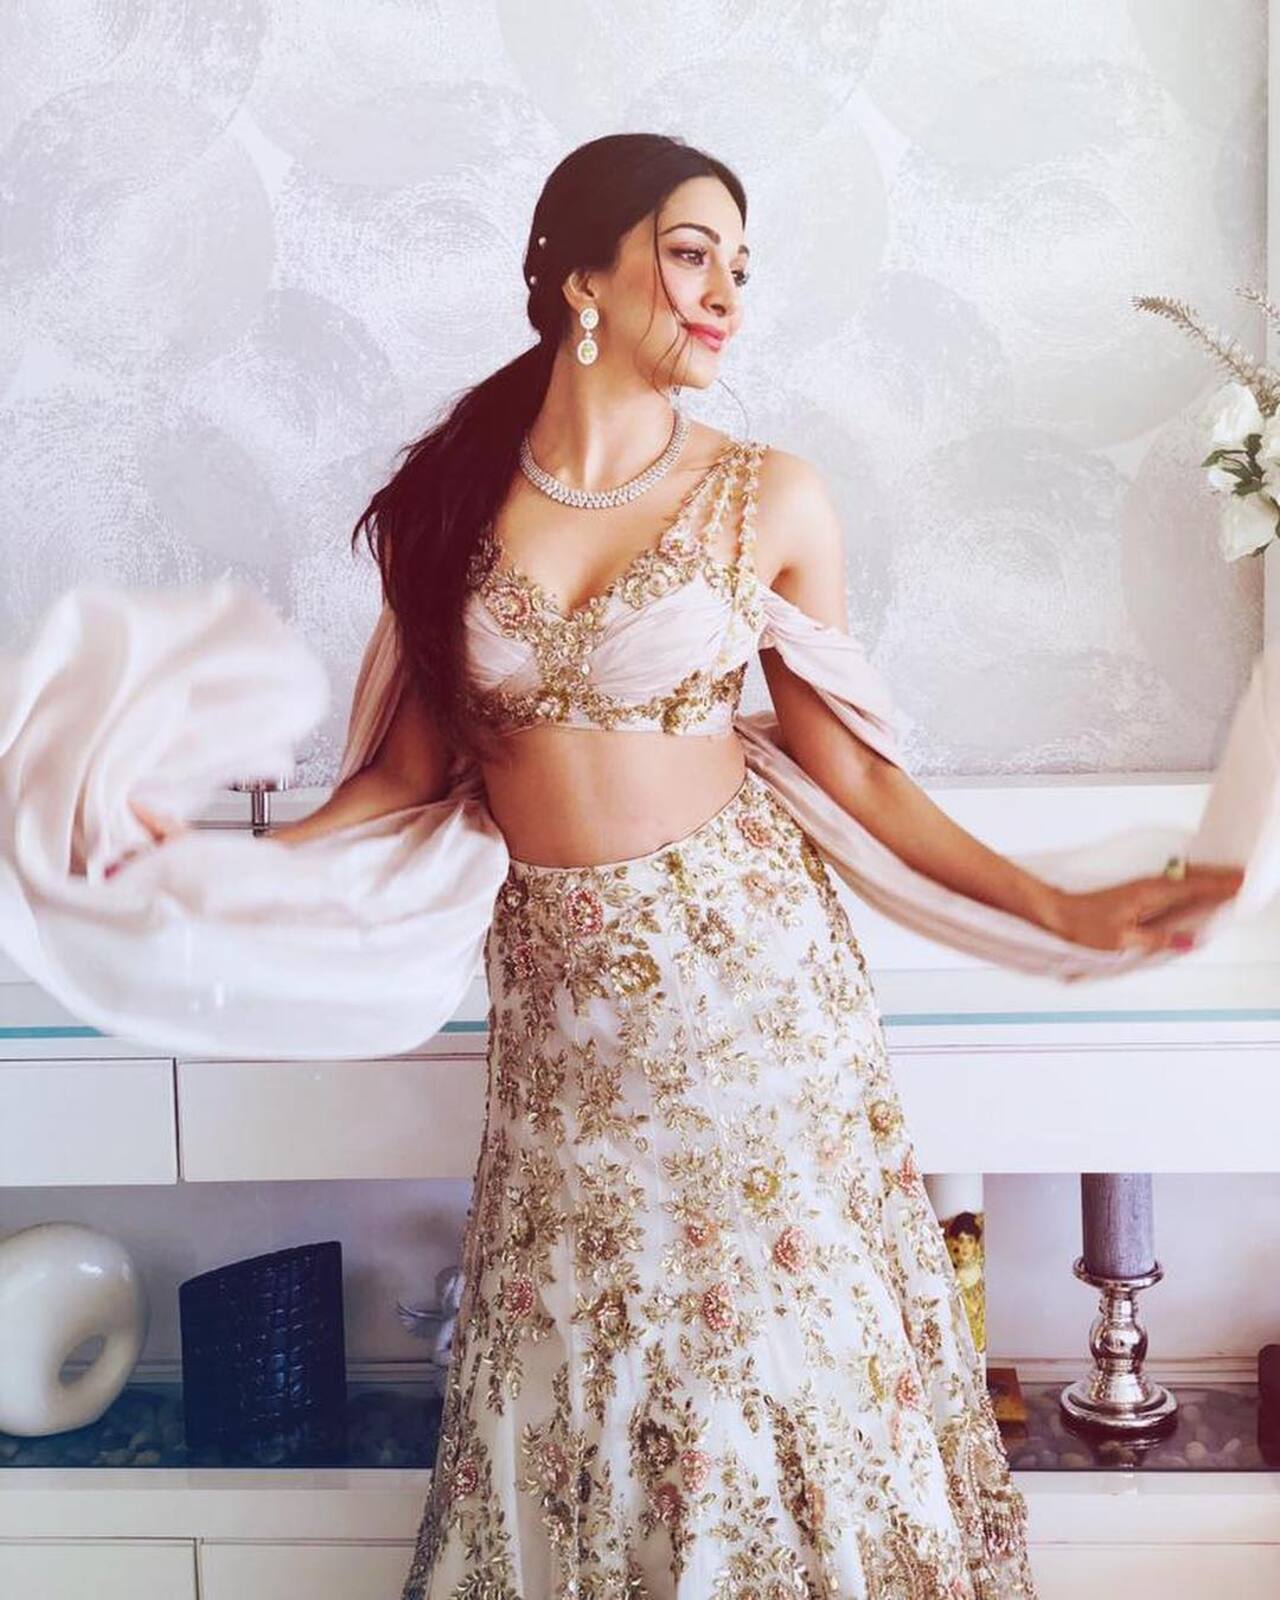 Kiara Advani
The actress radiated elegance in her shimmering peach-pink lehenga adorned with golden floral motifs. She paired her ensemble with impeccably chosen stone-studded necklaces and earrings. Kiara's dazzling smile was the perfect finishing touch to her ensemble!